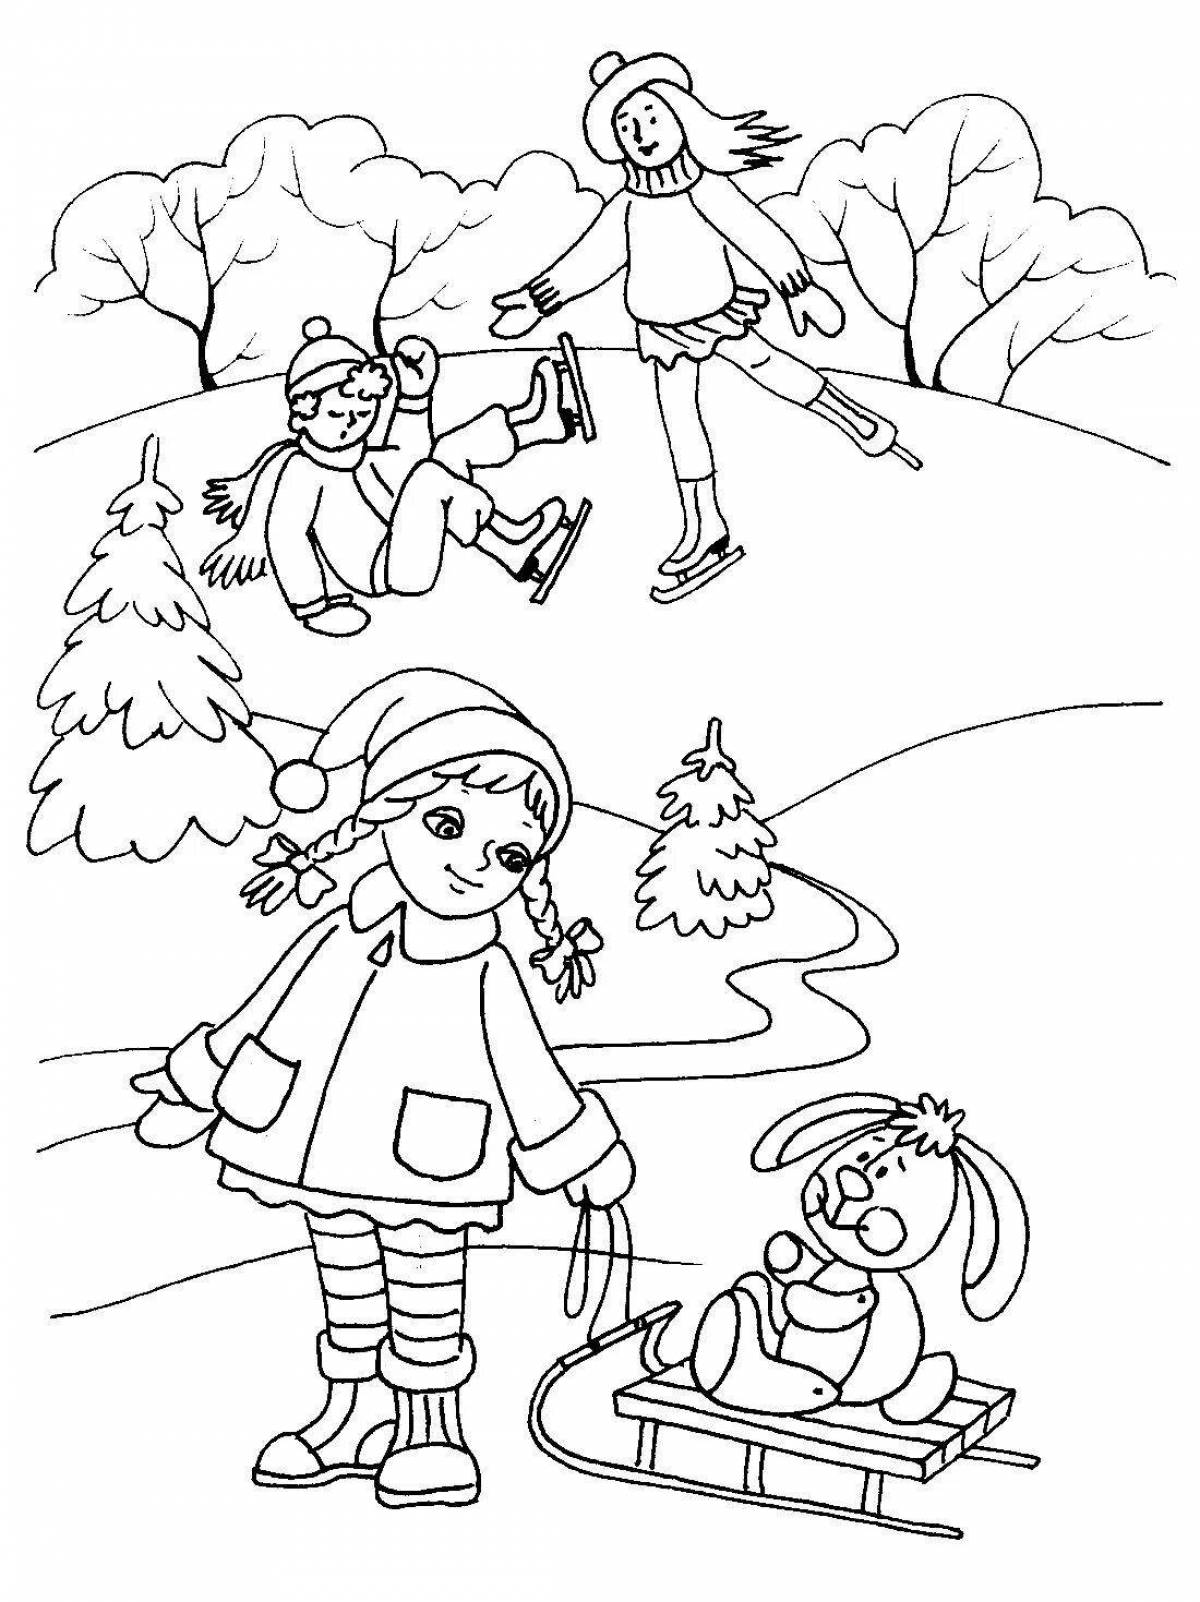 Outstanding winter coloring book for 4-5 year olds